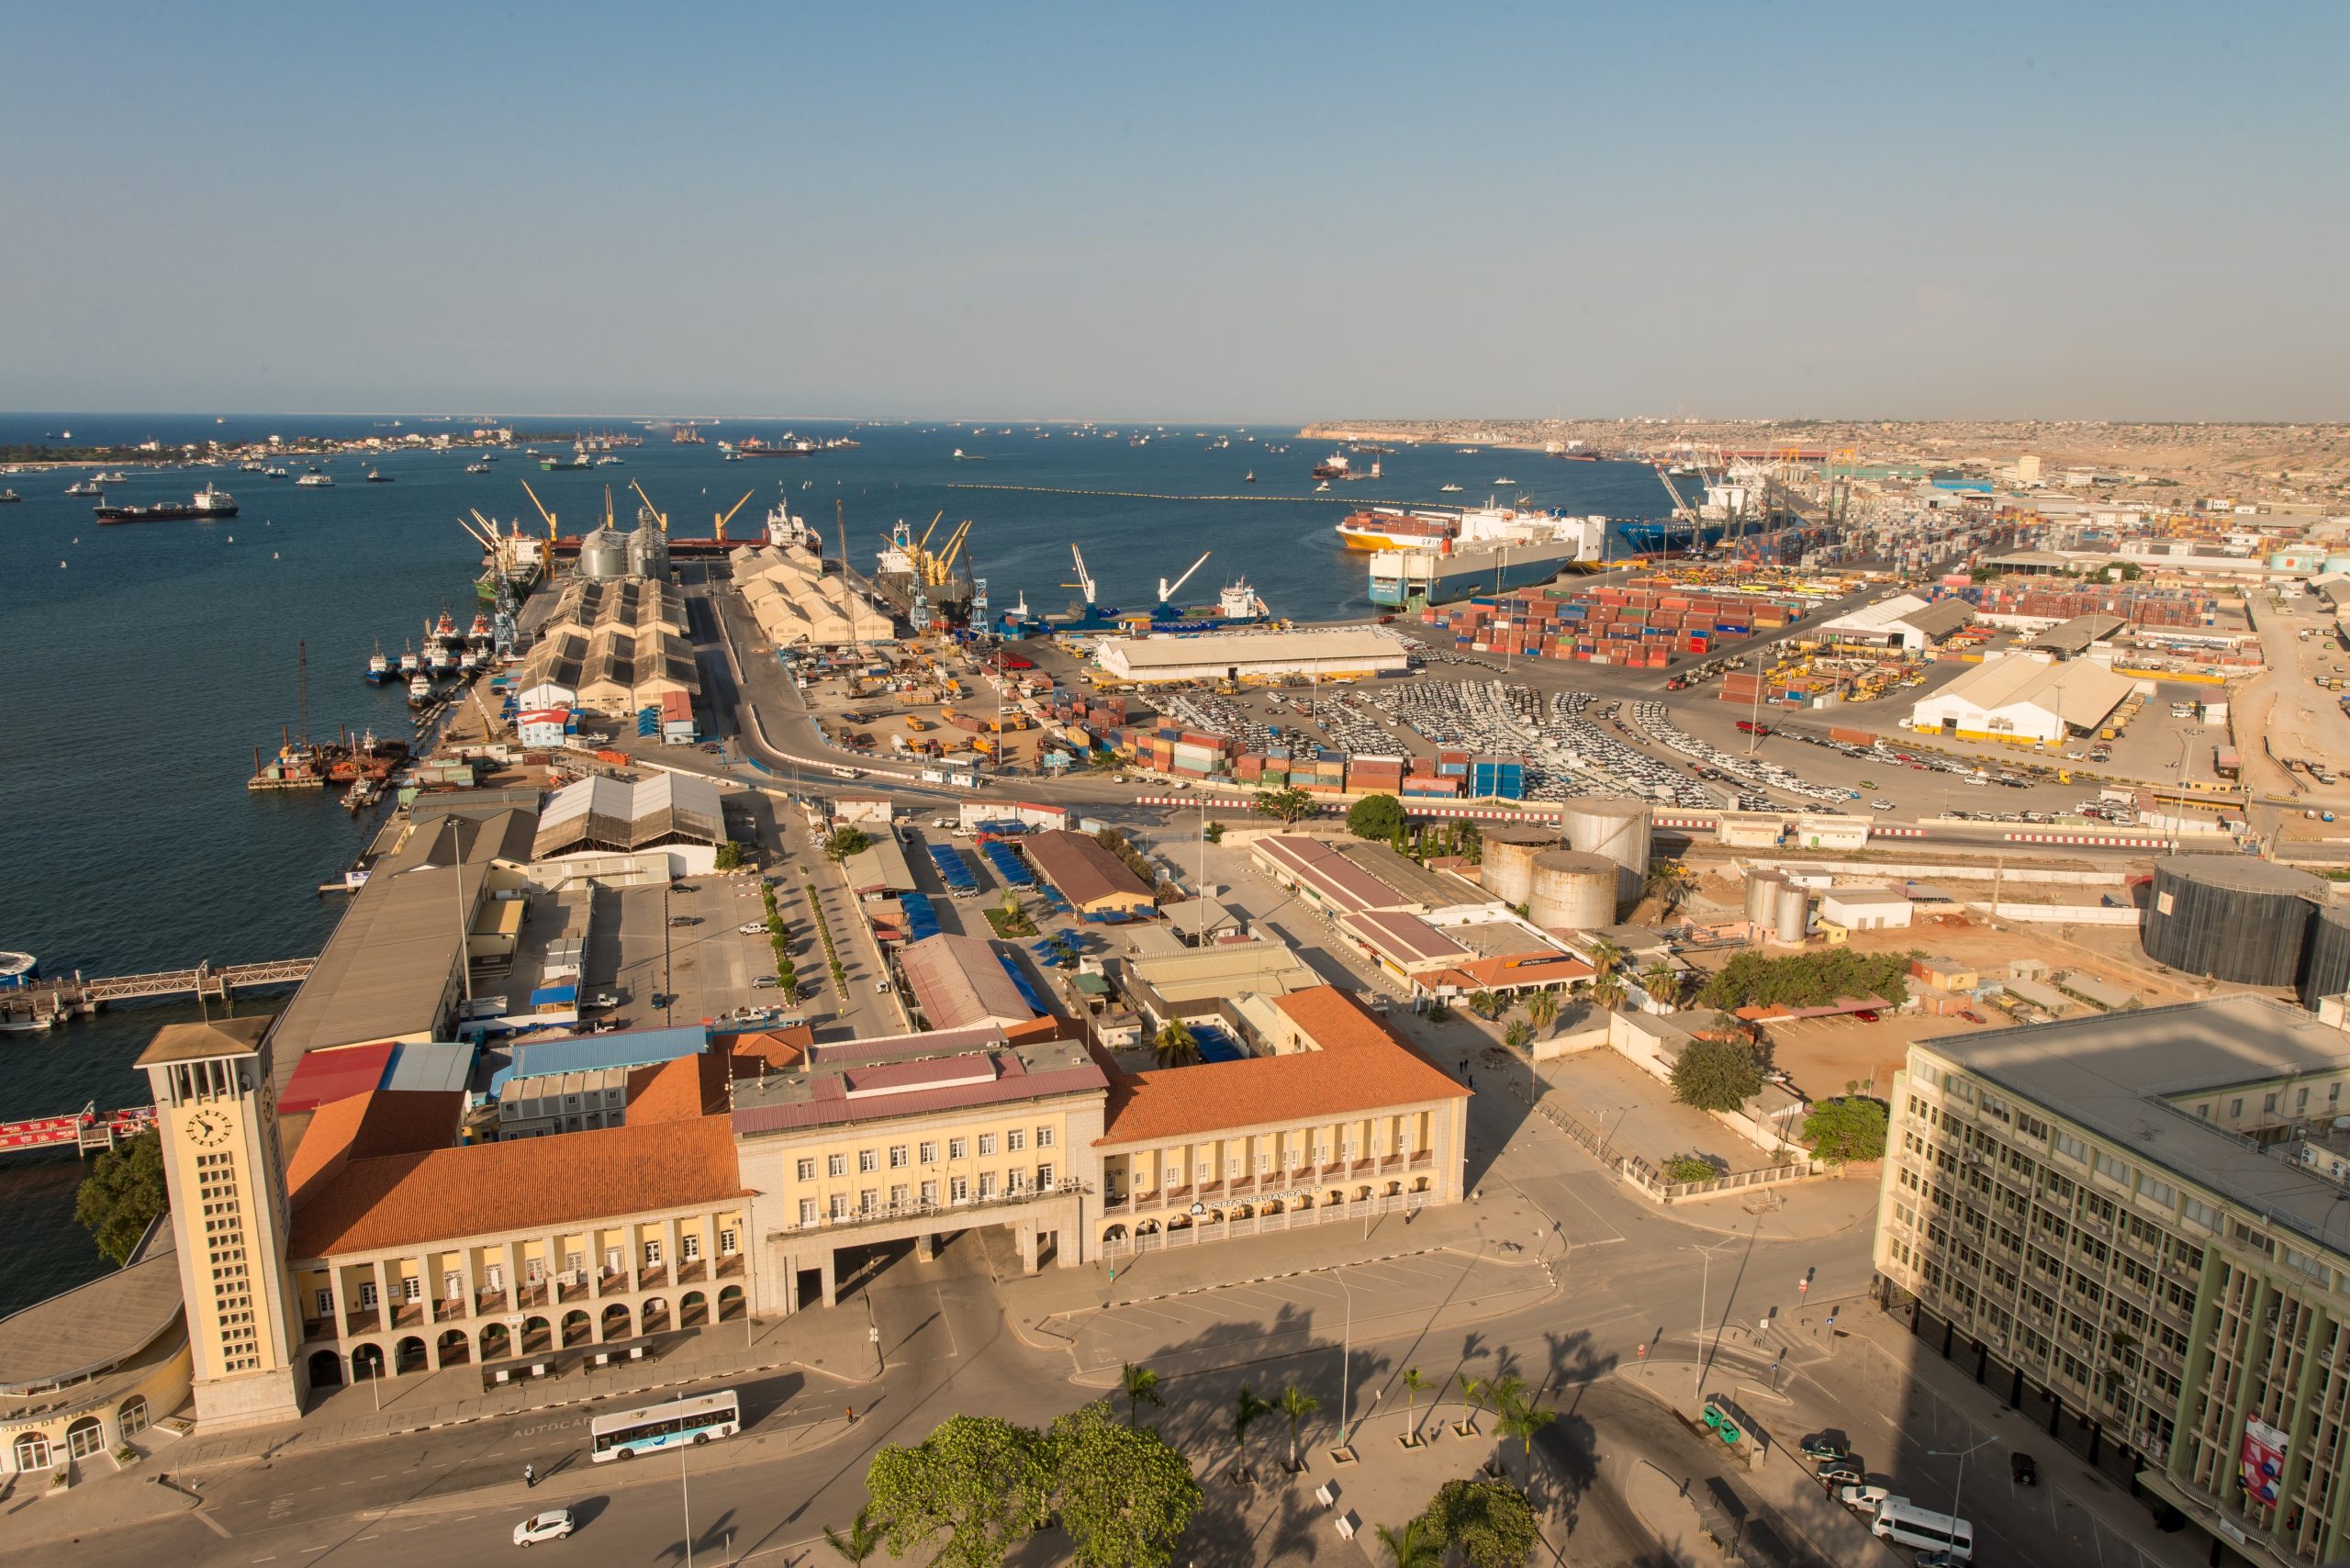 IMO-Singapore project to implement digital ship clearance system in the Port of Lobito, Angola